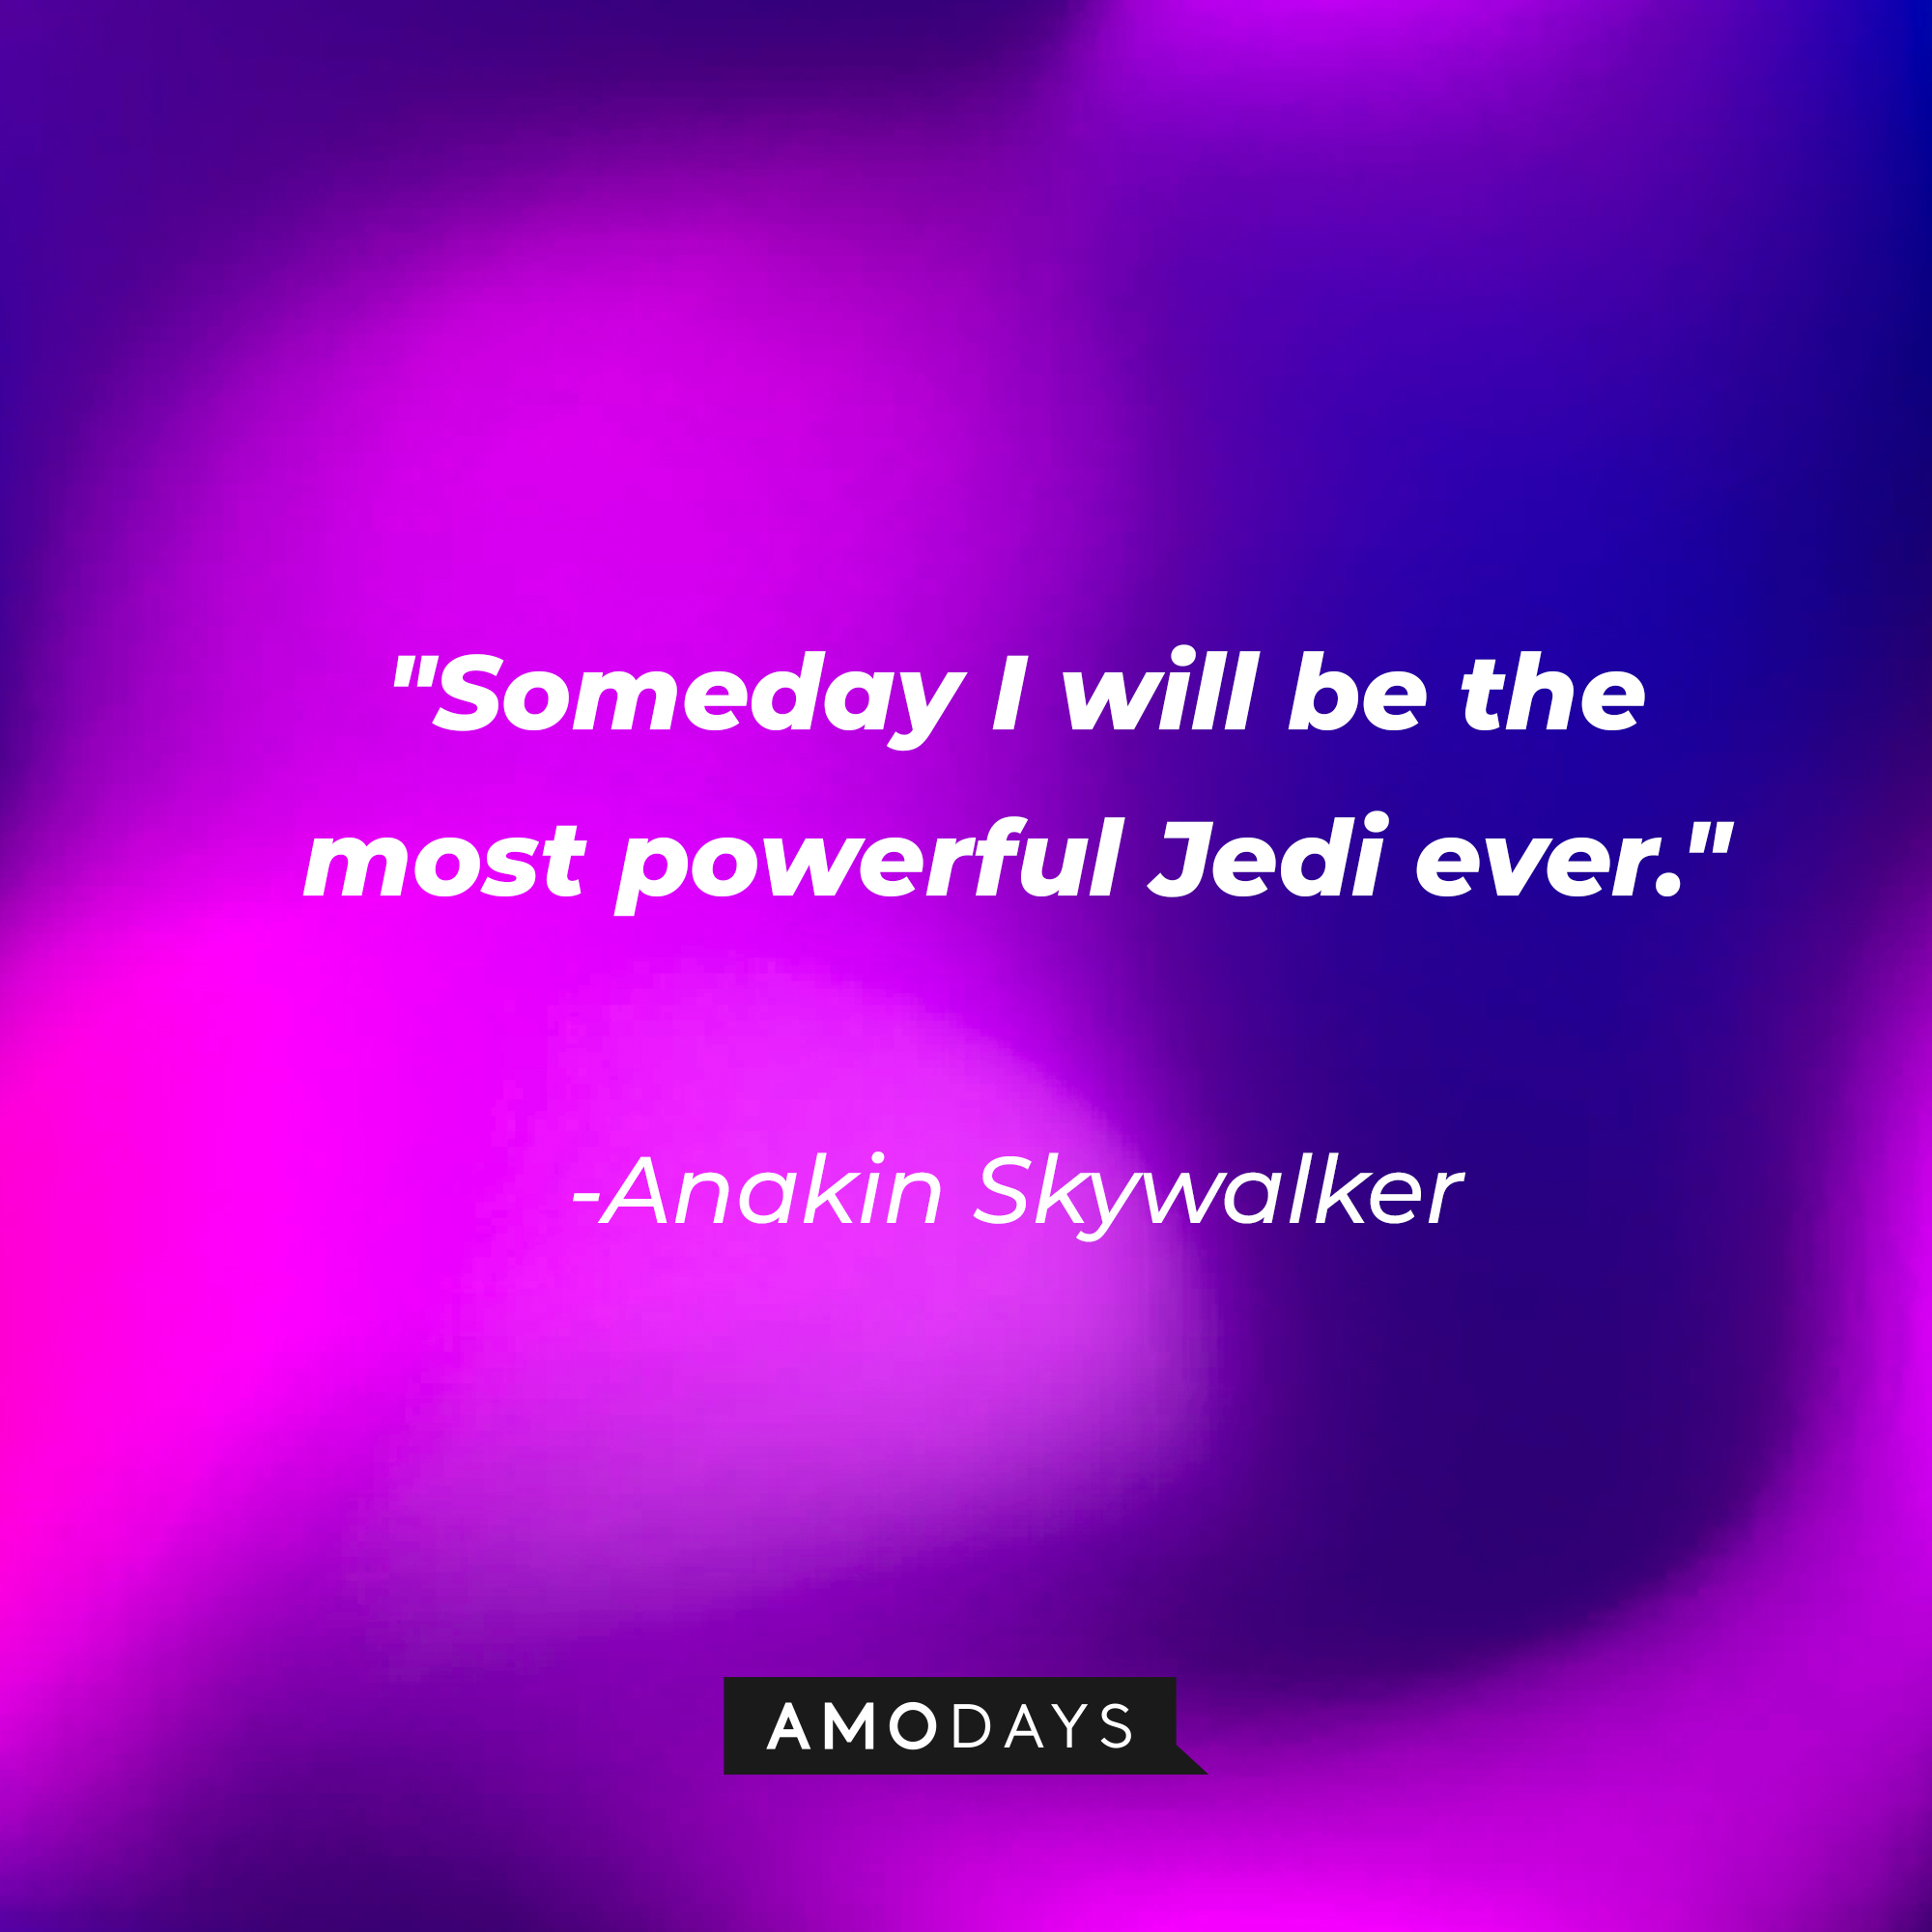 Anakin Skywalker's quote: "Someday I will be the most powerful Jedi ever." | Source: AmoDays